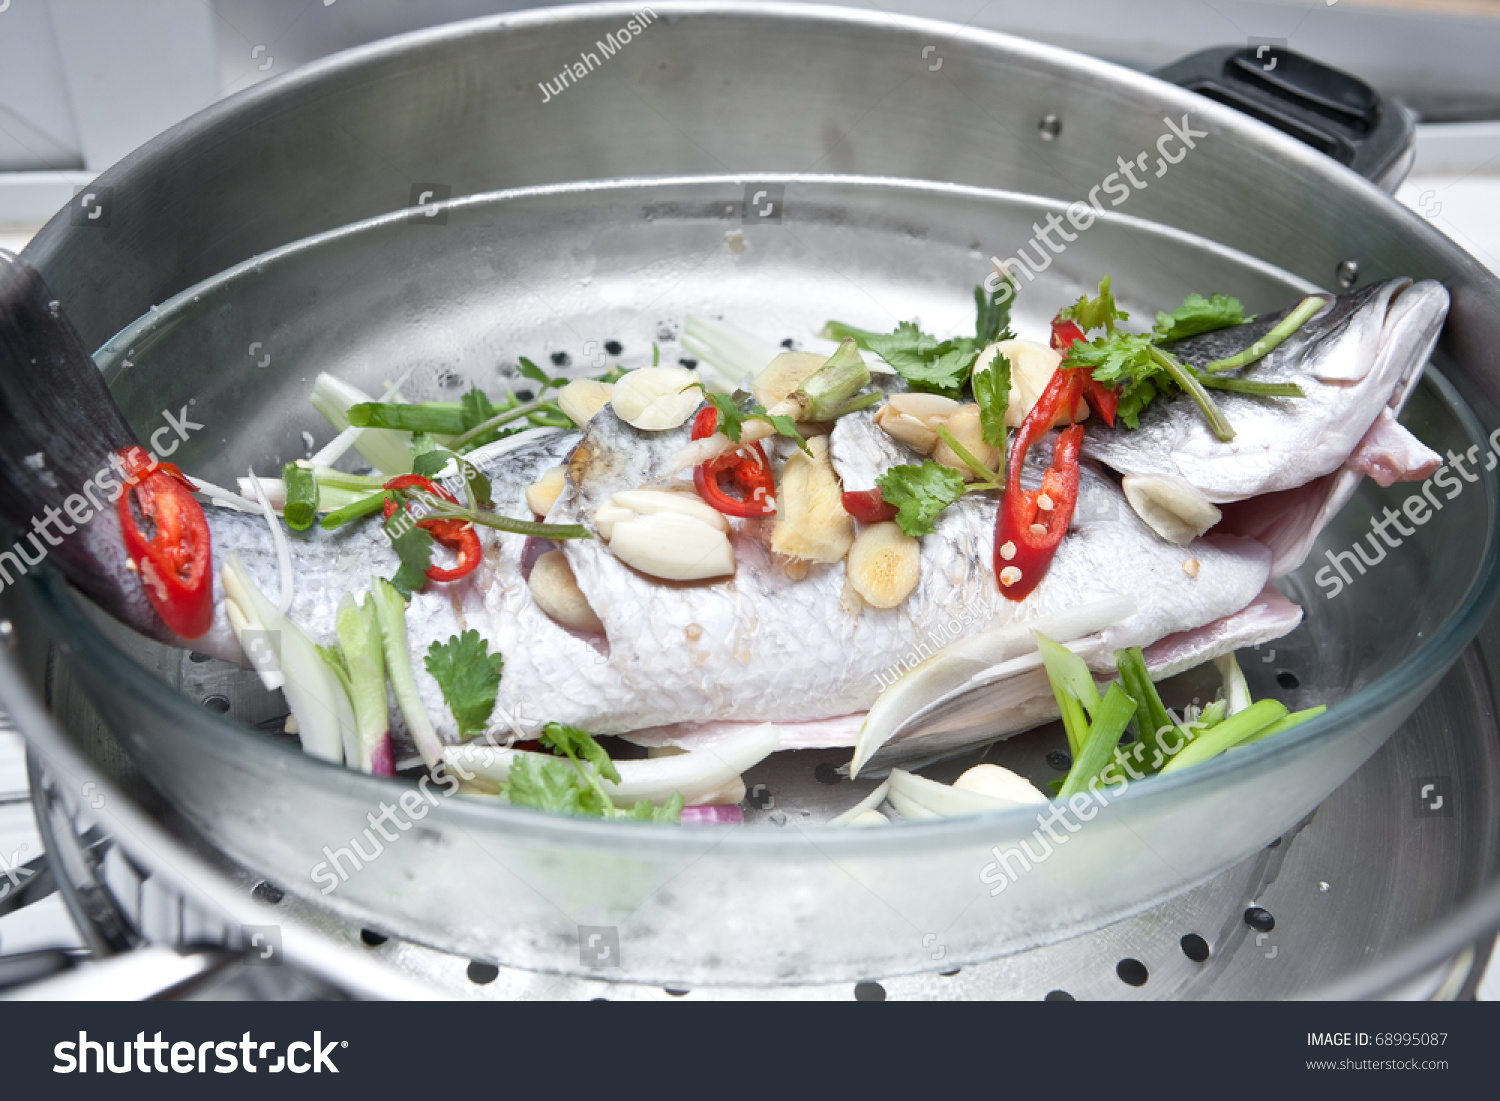 How to do steam fish фото 3